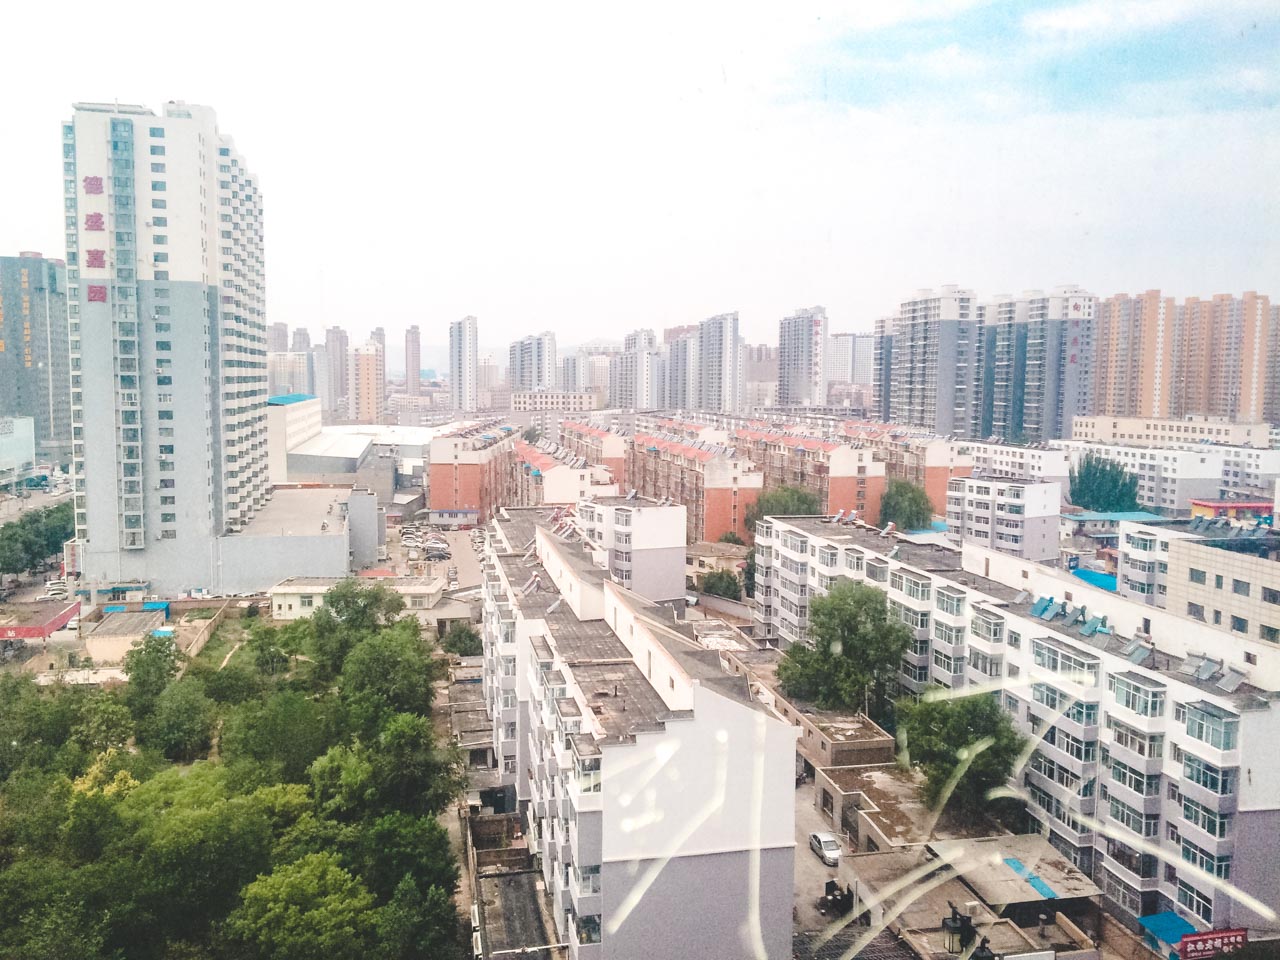 The panorama of Datong, Shanxi seen from a hallway inside the Haohai International Hotel